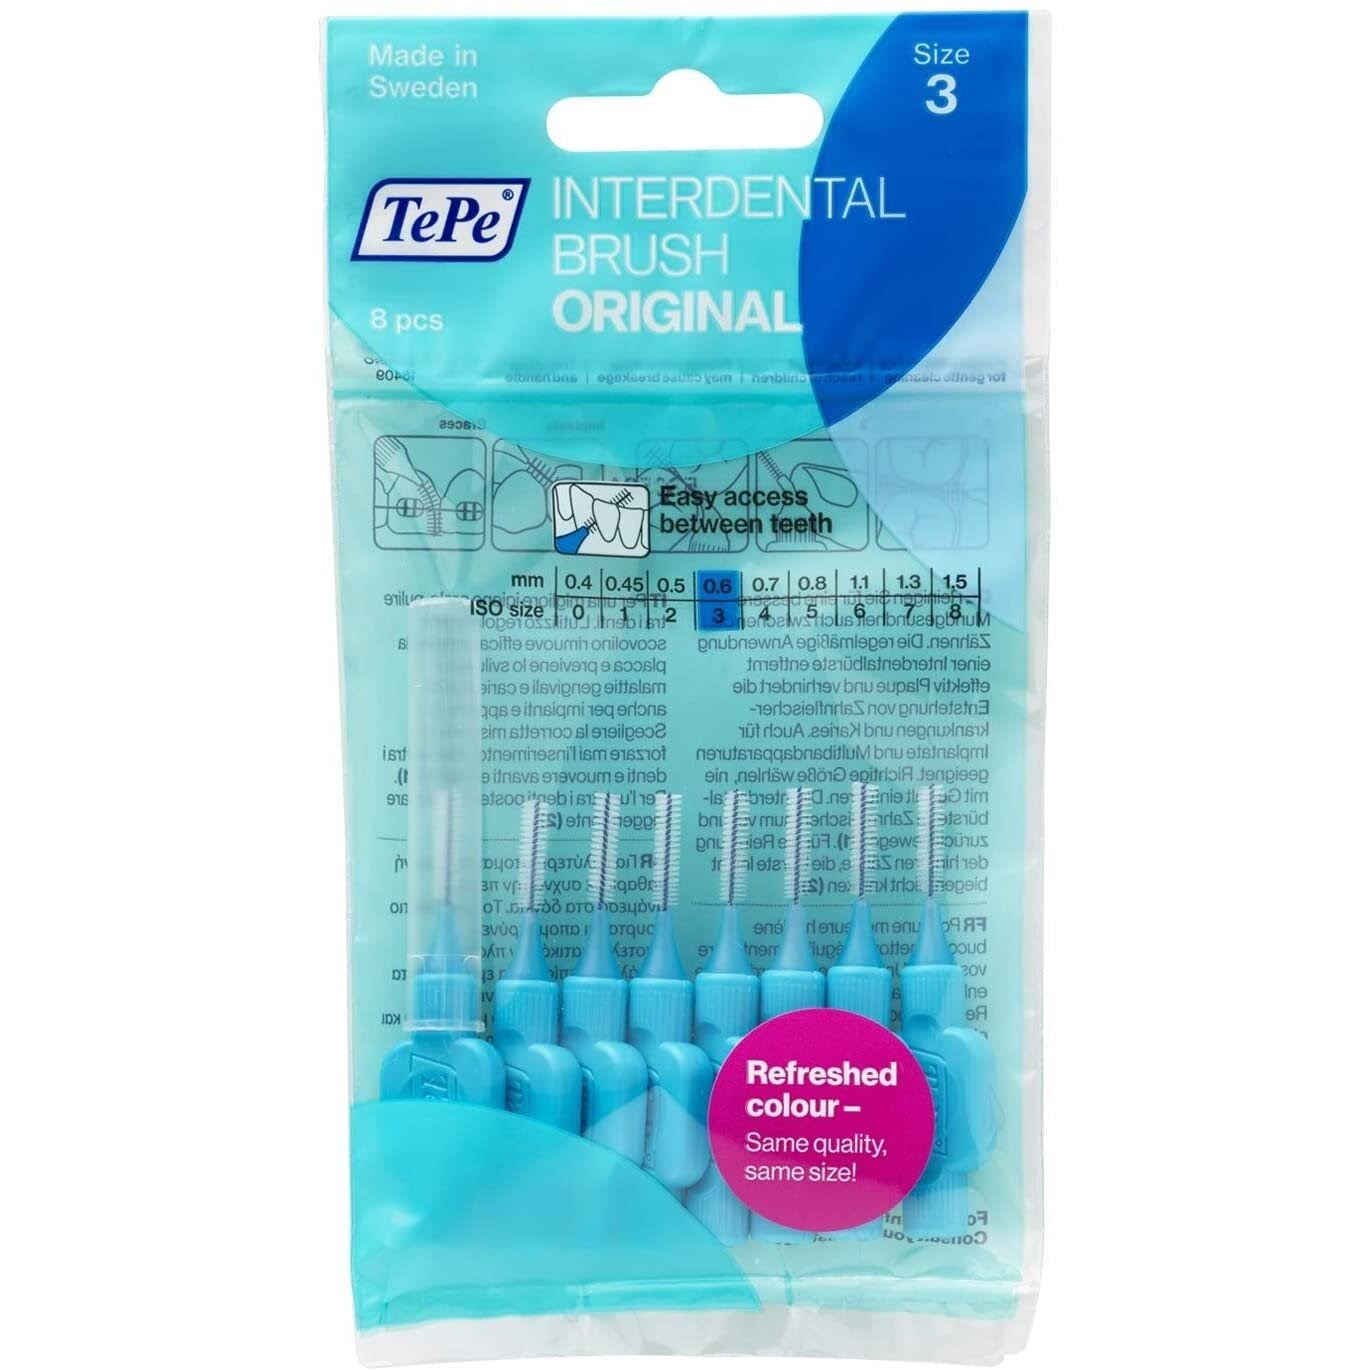 TePe Interdental Brushes Blue Original (0.6mm) / Simple and Effective Cleaning of interdental Spaces / 1 x 8 Brushes